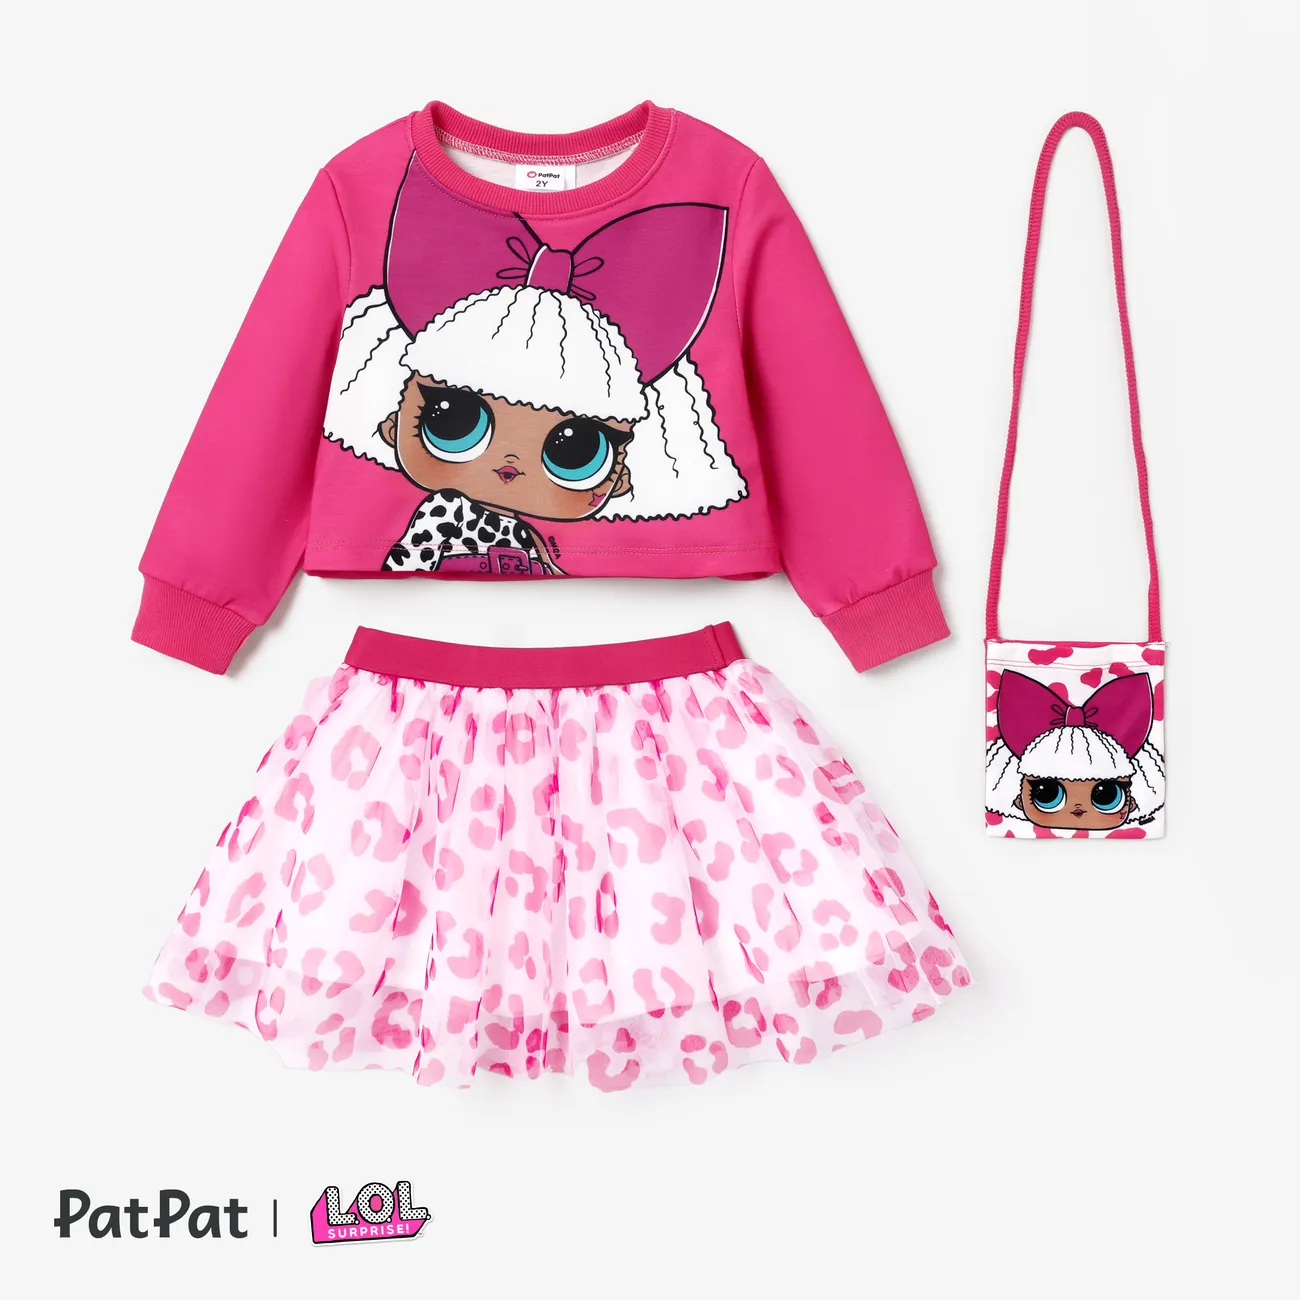 L.O.L. SURPRISE! Toddler Girl Glitter Hem Character Pattern Top with Crossbody Bag Skirt Suit  Peach* big image 1